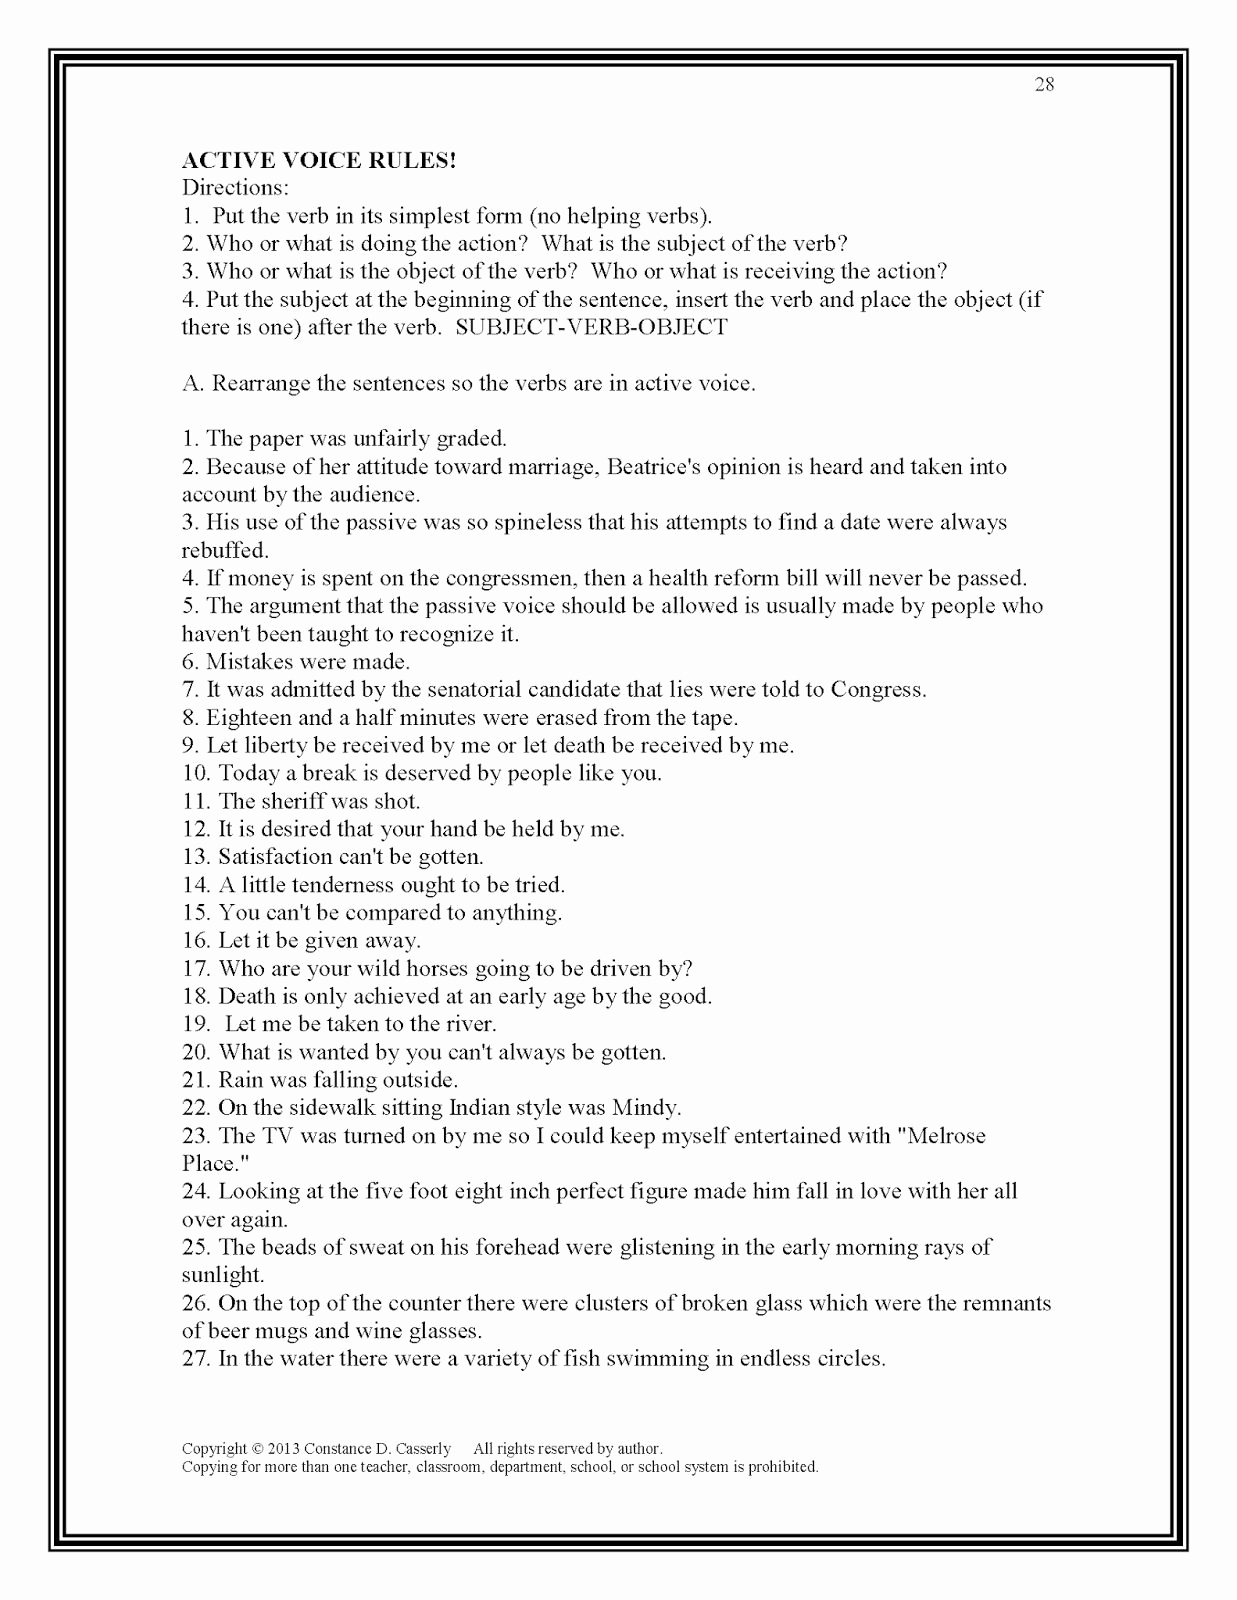 Prepositions Worksheets Middle School Luxury Prepositional Phrases Worksheet with Answer Key